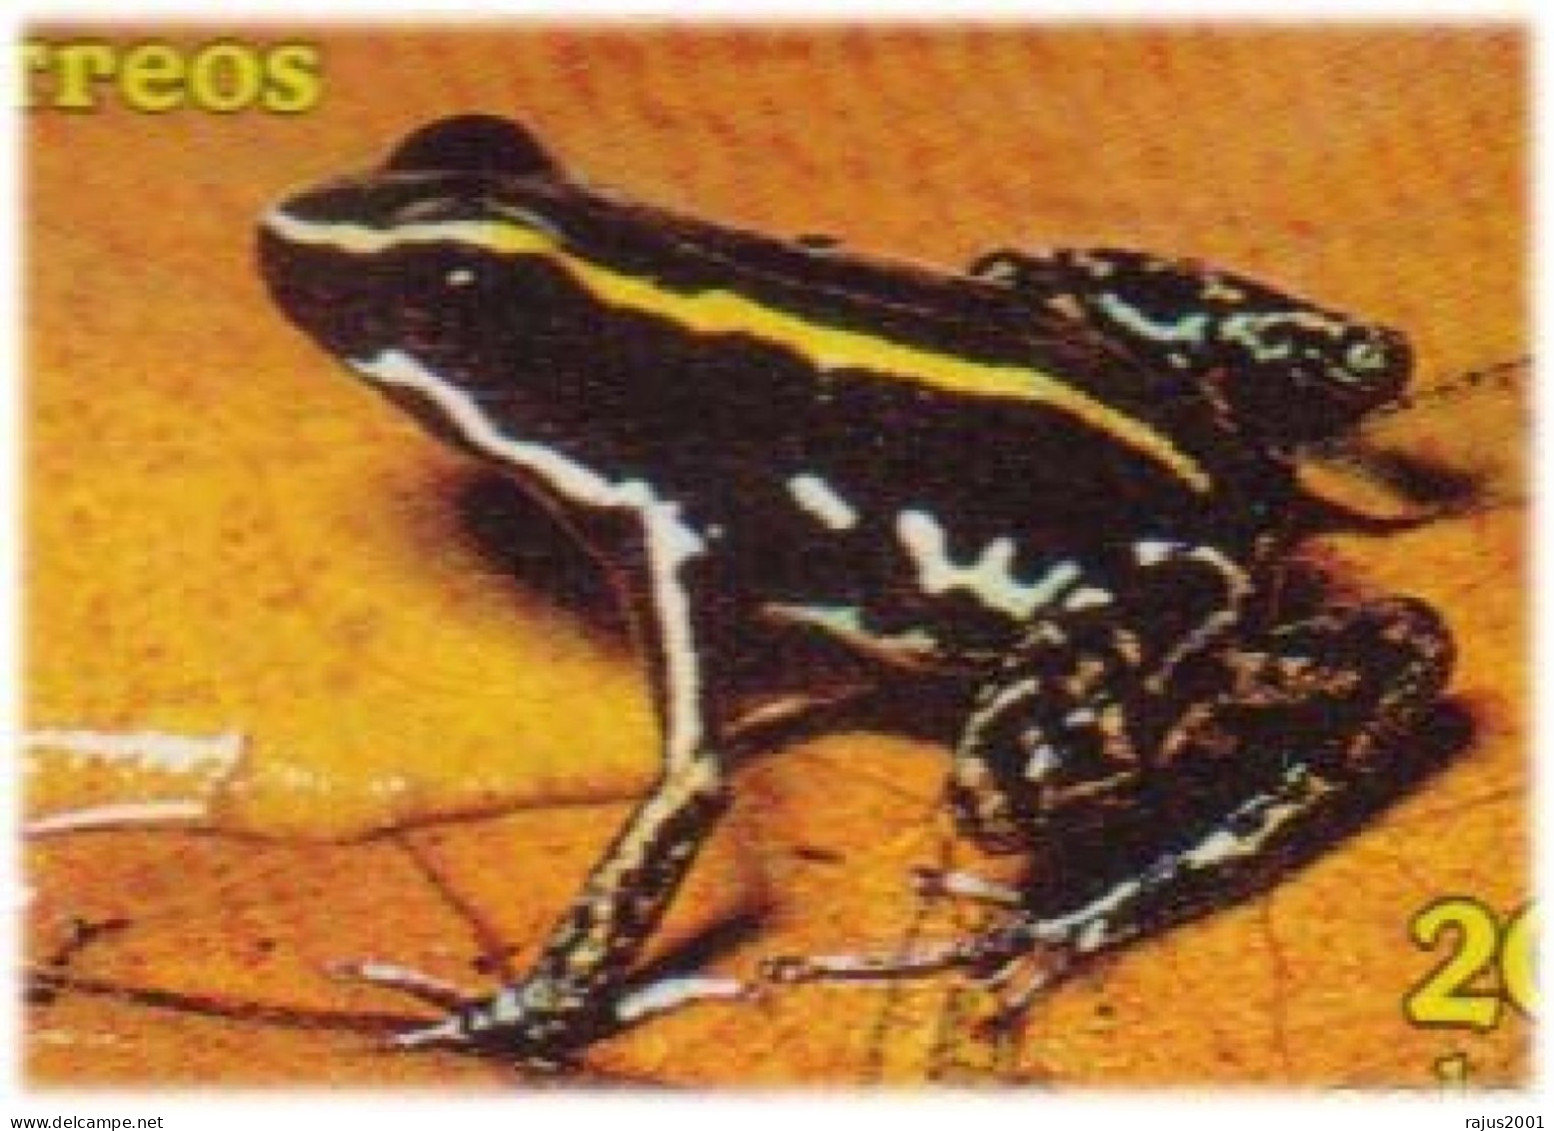 Phyllobates Lugubris Lovely Poison Frog, Hourglass Tree Frog, Blue Jeans Strawberry Poison Frog, Harmful Animal FDC - Frösche